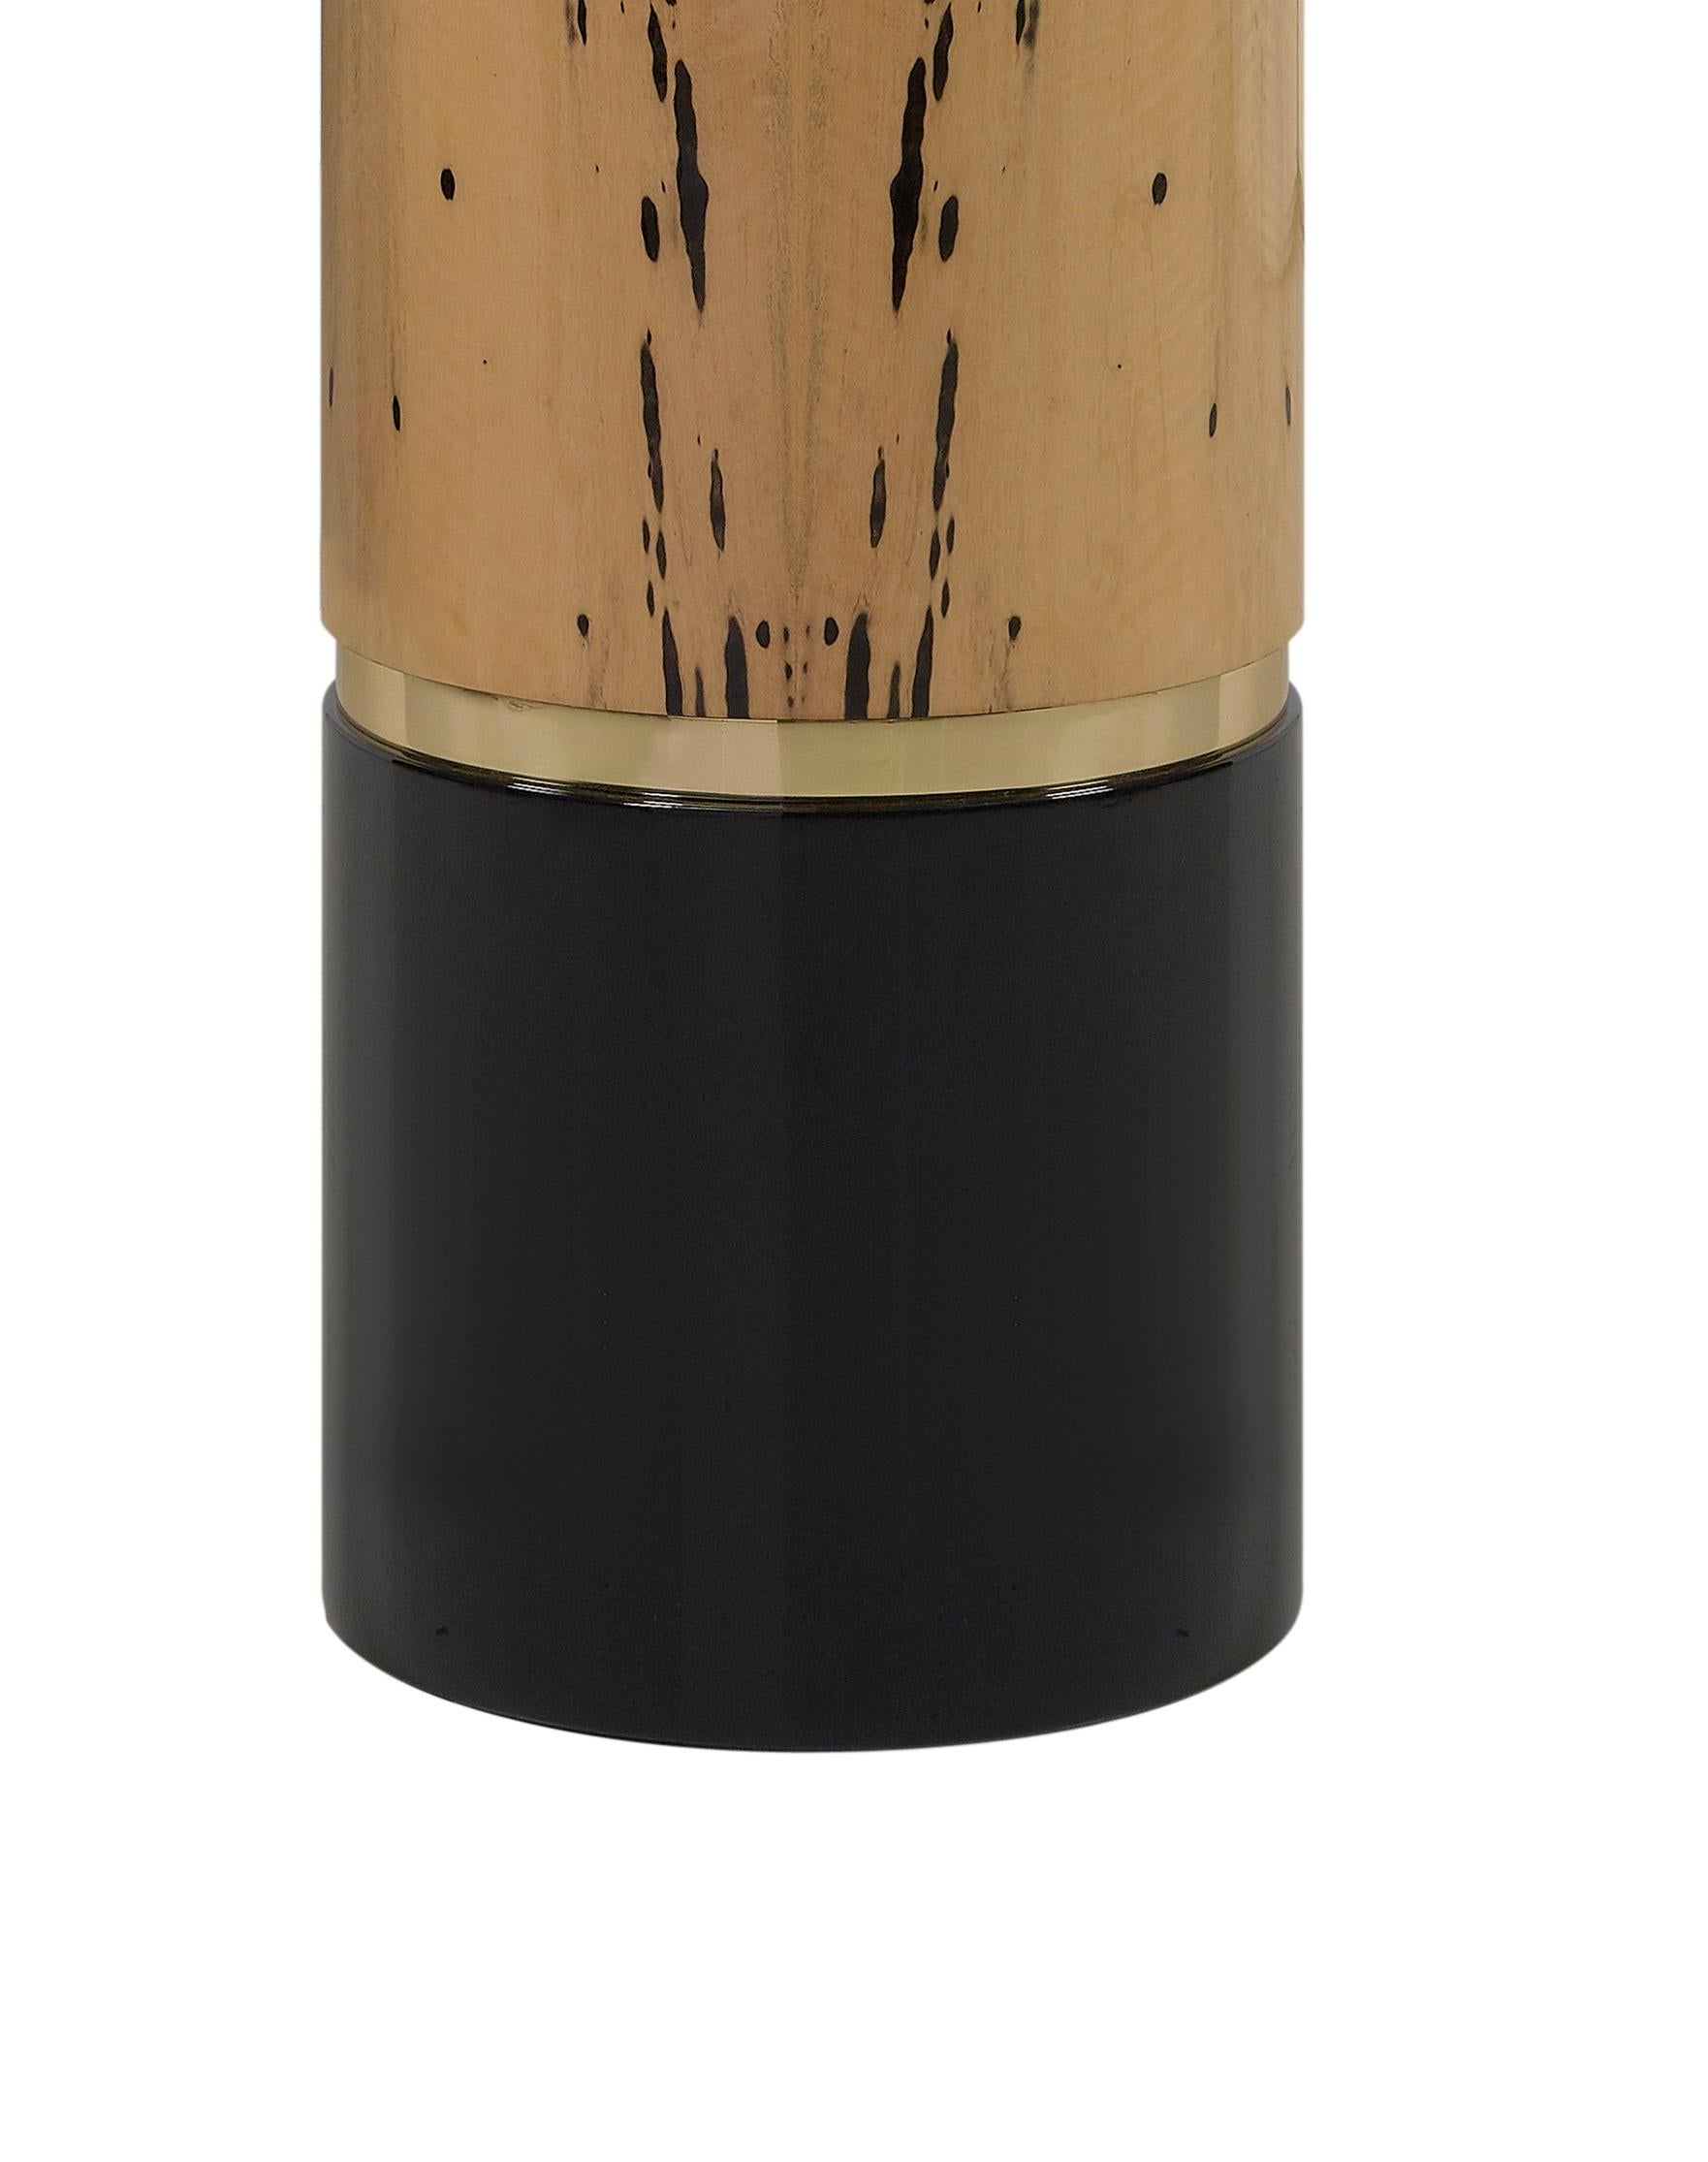 Set Of 2 Royal Ebony Pedestals by Memoir Essence
Dimensions: D 35 x W 35 x H 110 cm.
Materials: Polished brass, lacquer and Royal ebony.

Also available in brushed brass. Please contact us.

An exquisite combination of royal ebony veneer and black